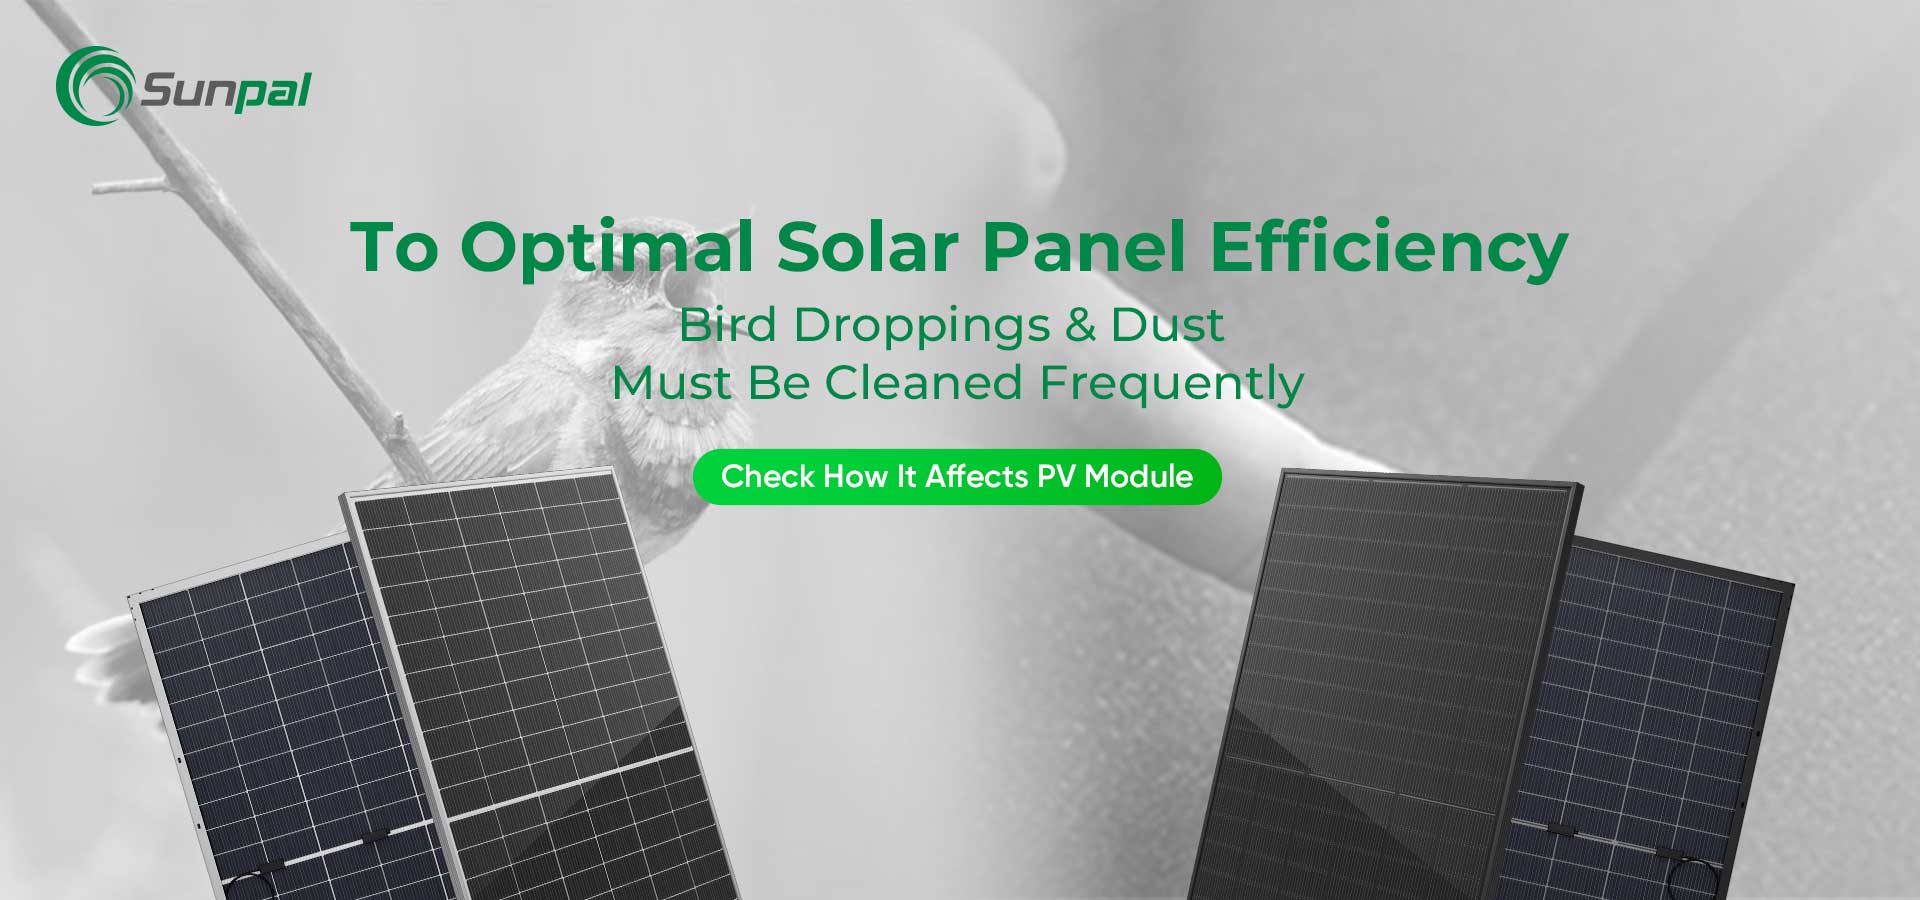 Dust & Bird Droppings: Cleaning For Optimal Solar Panel Performance